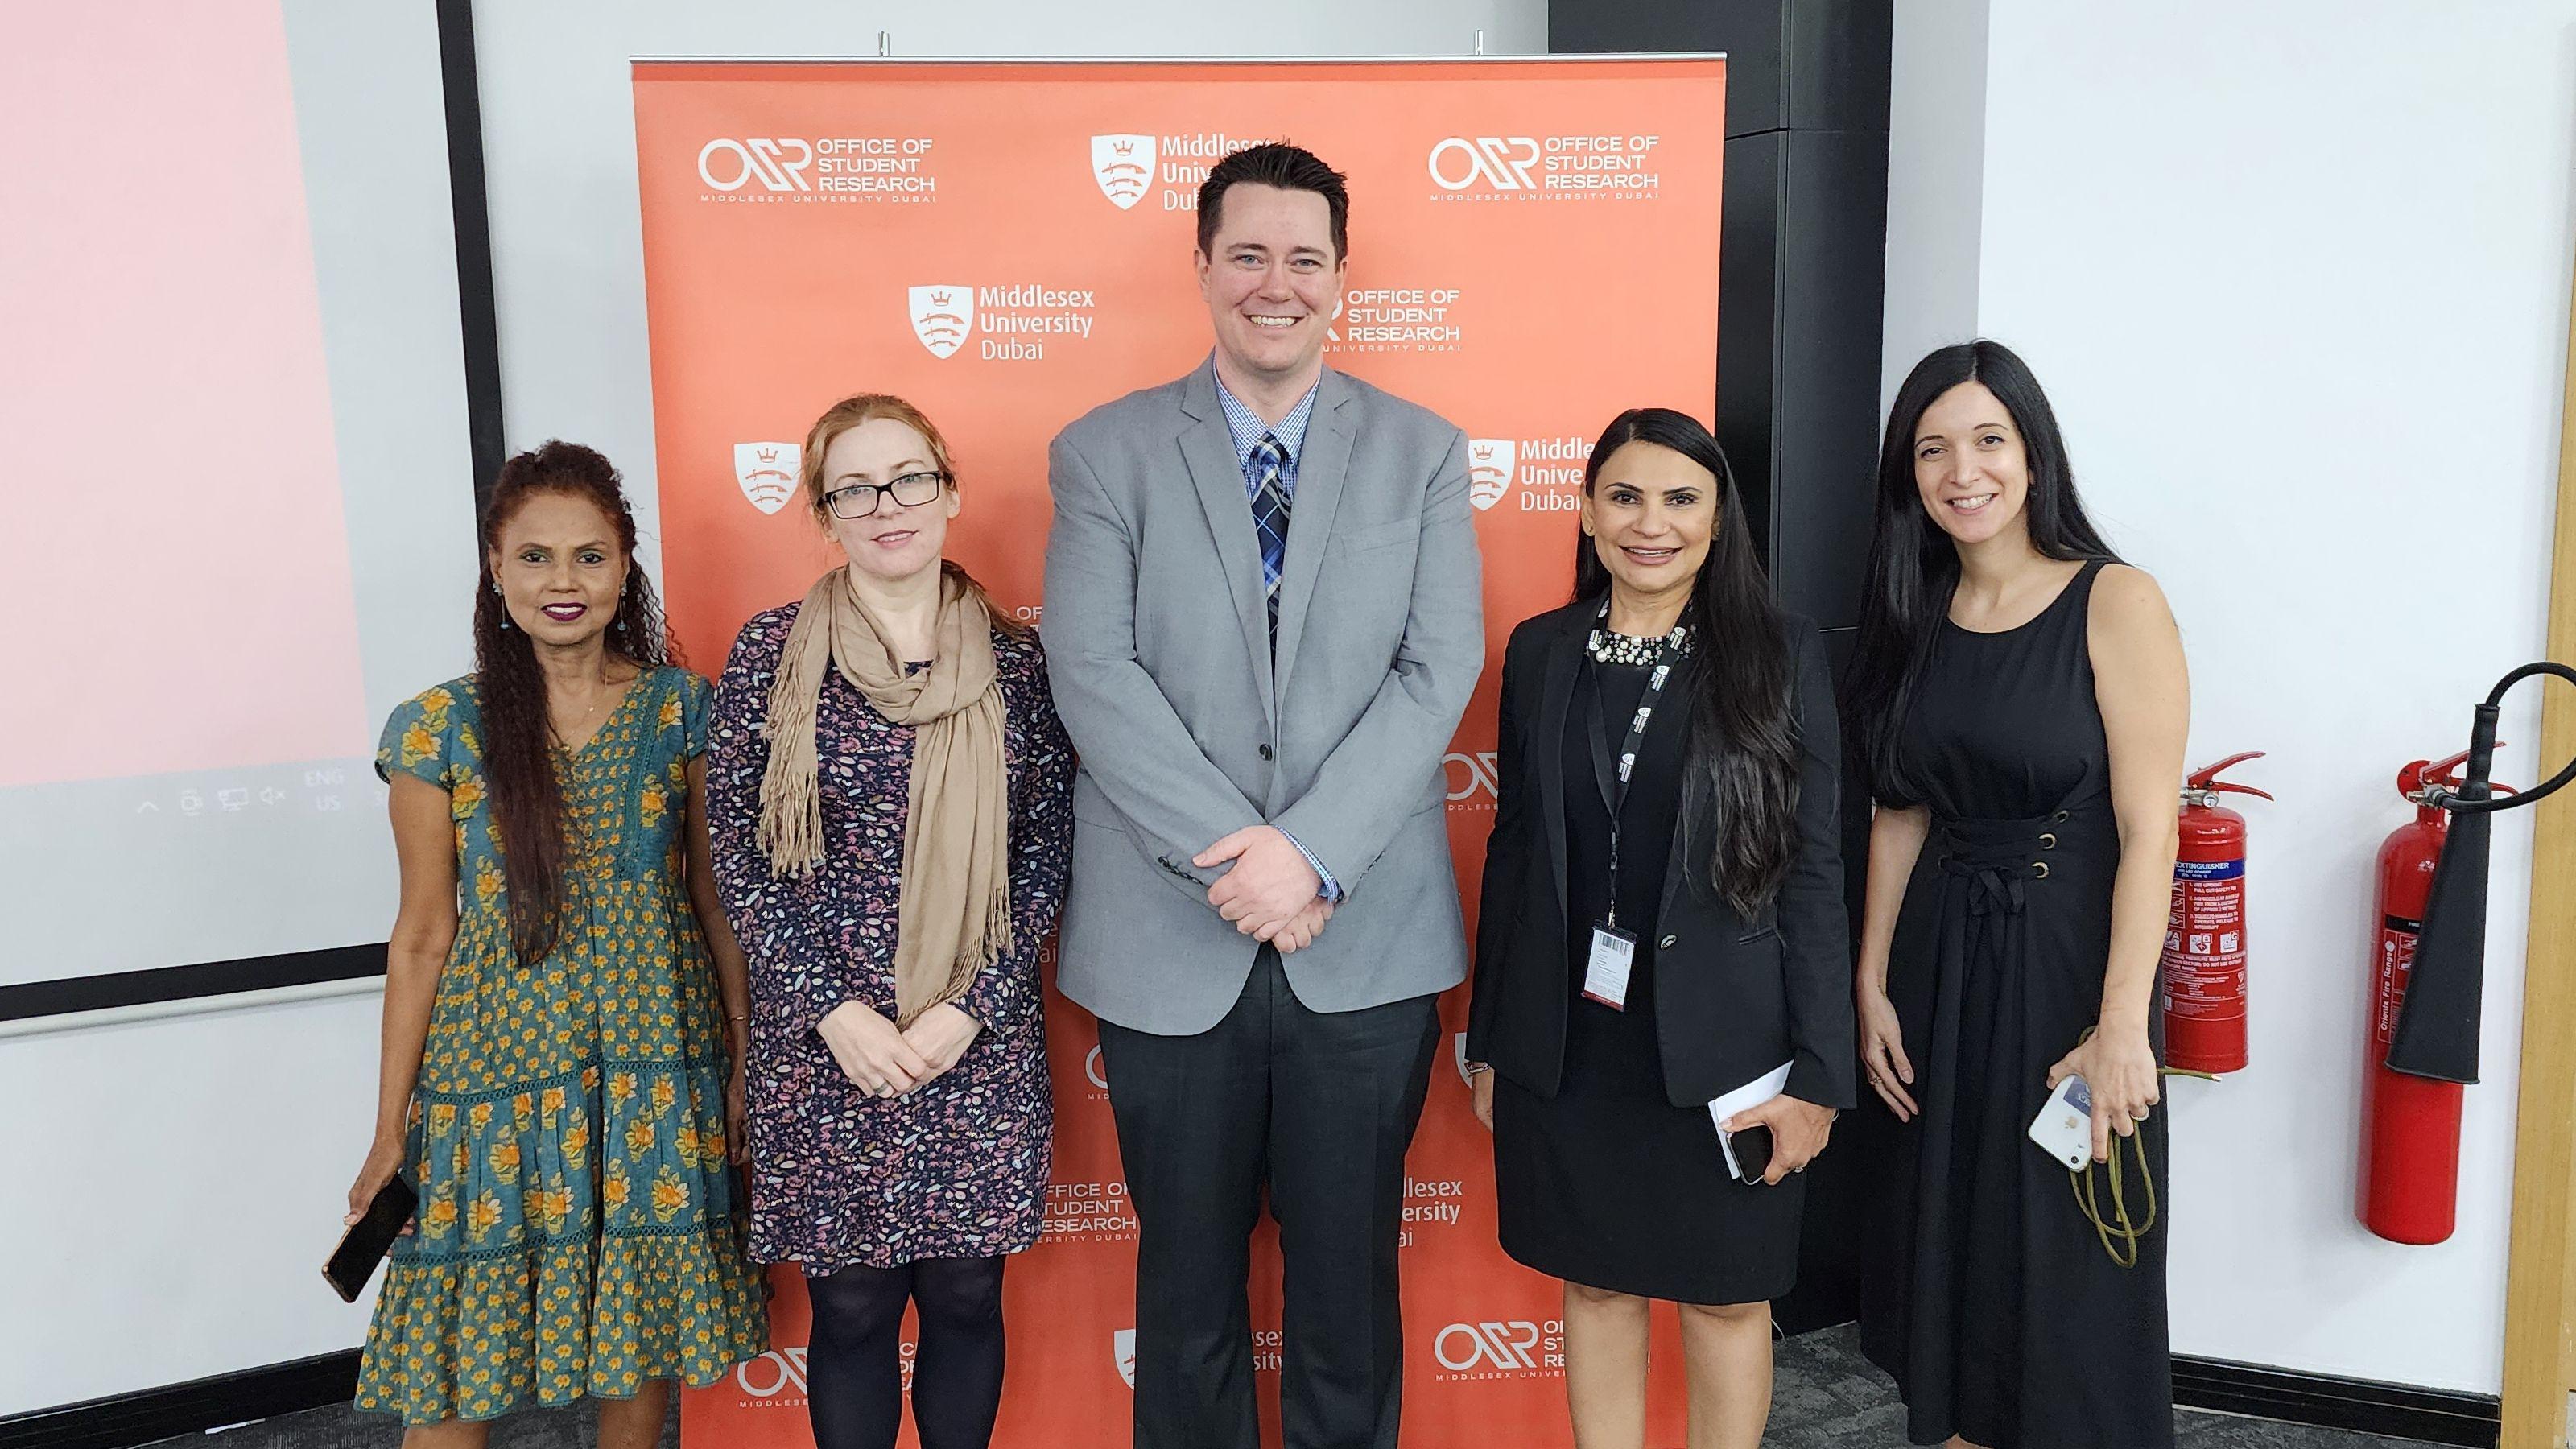 On 9th March 2023, the Office of Student Research (OSR) at Middlesex University Dubai proudly held the 10th Annual Student Research and Innovation Showcase (SRIS). 